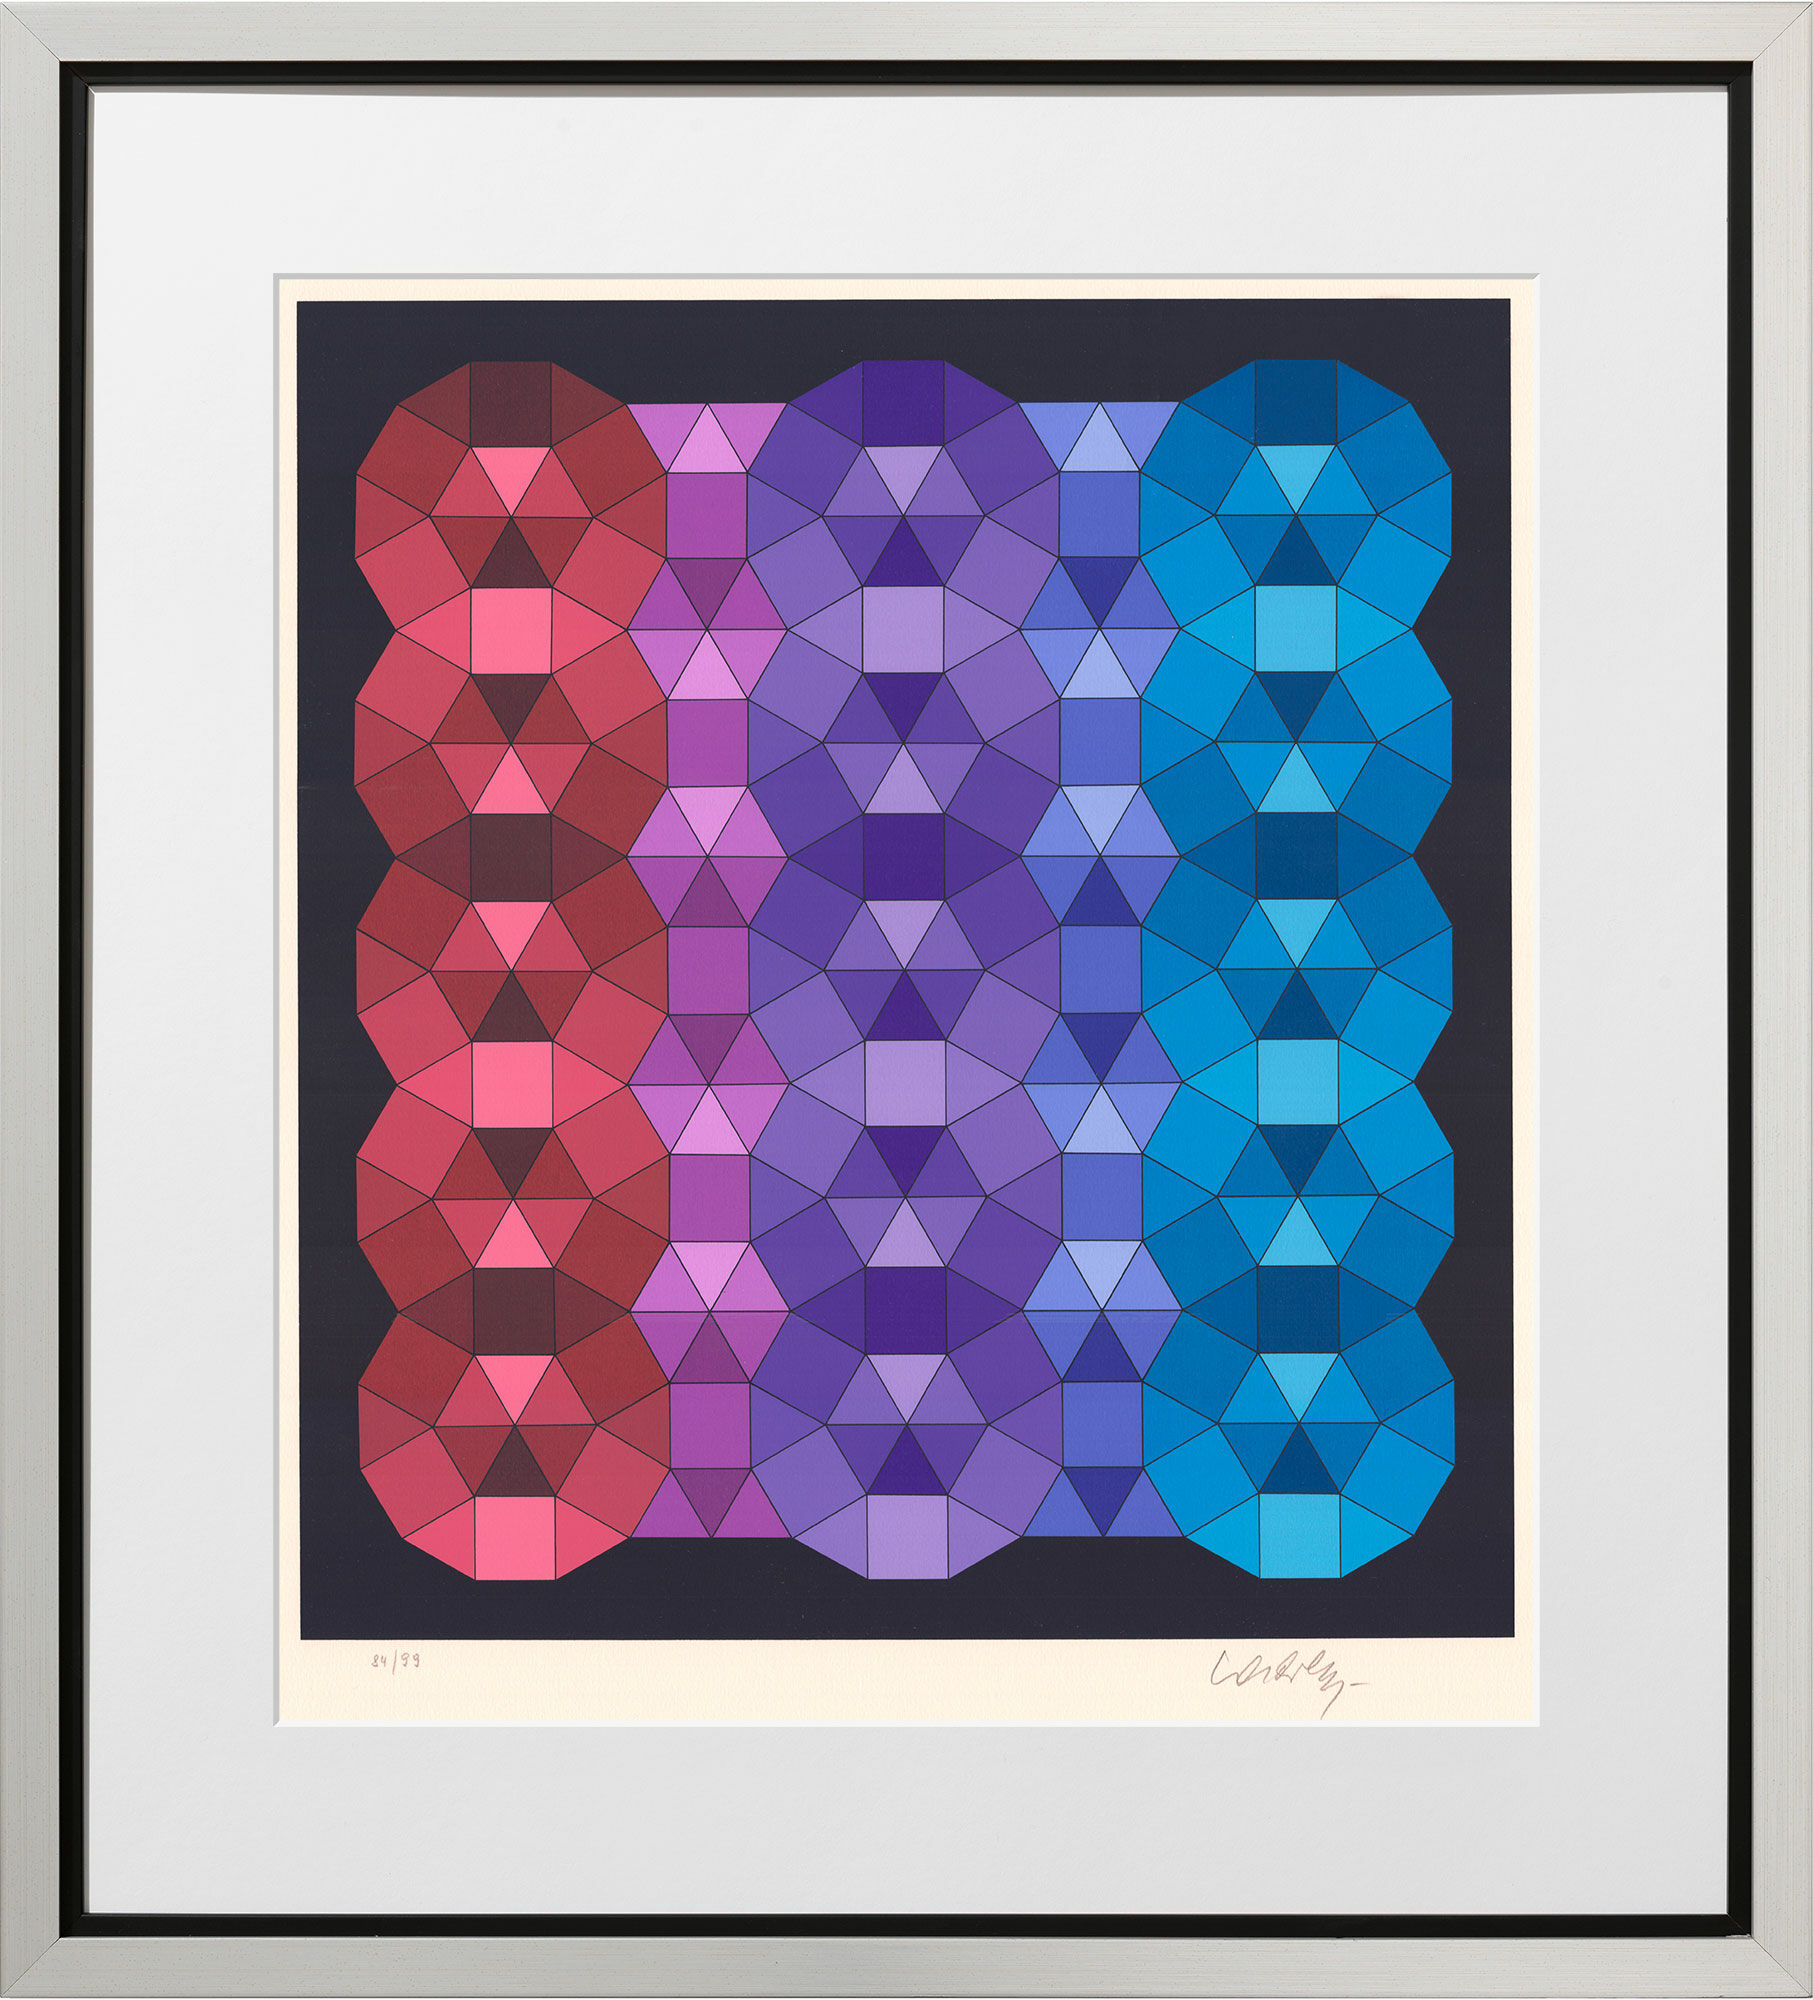 Picture "YKA" (1989), framed by Victor Vasarely